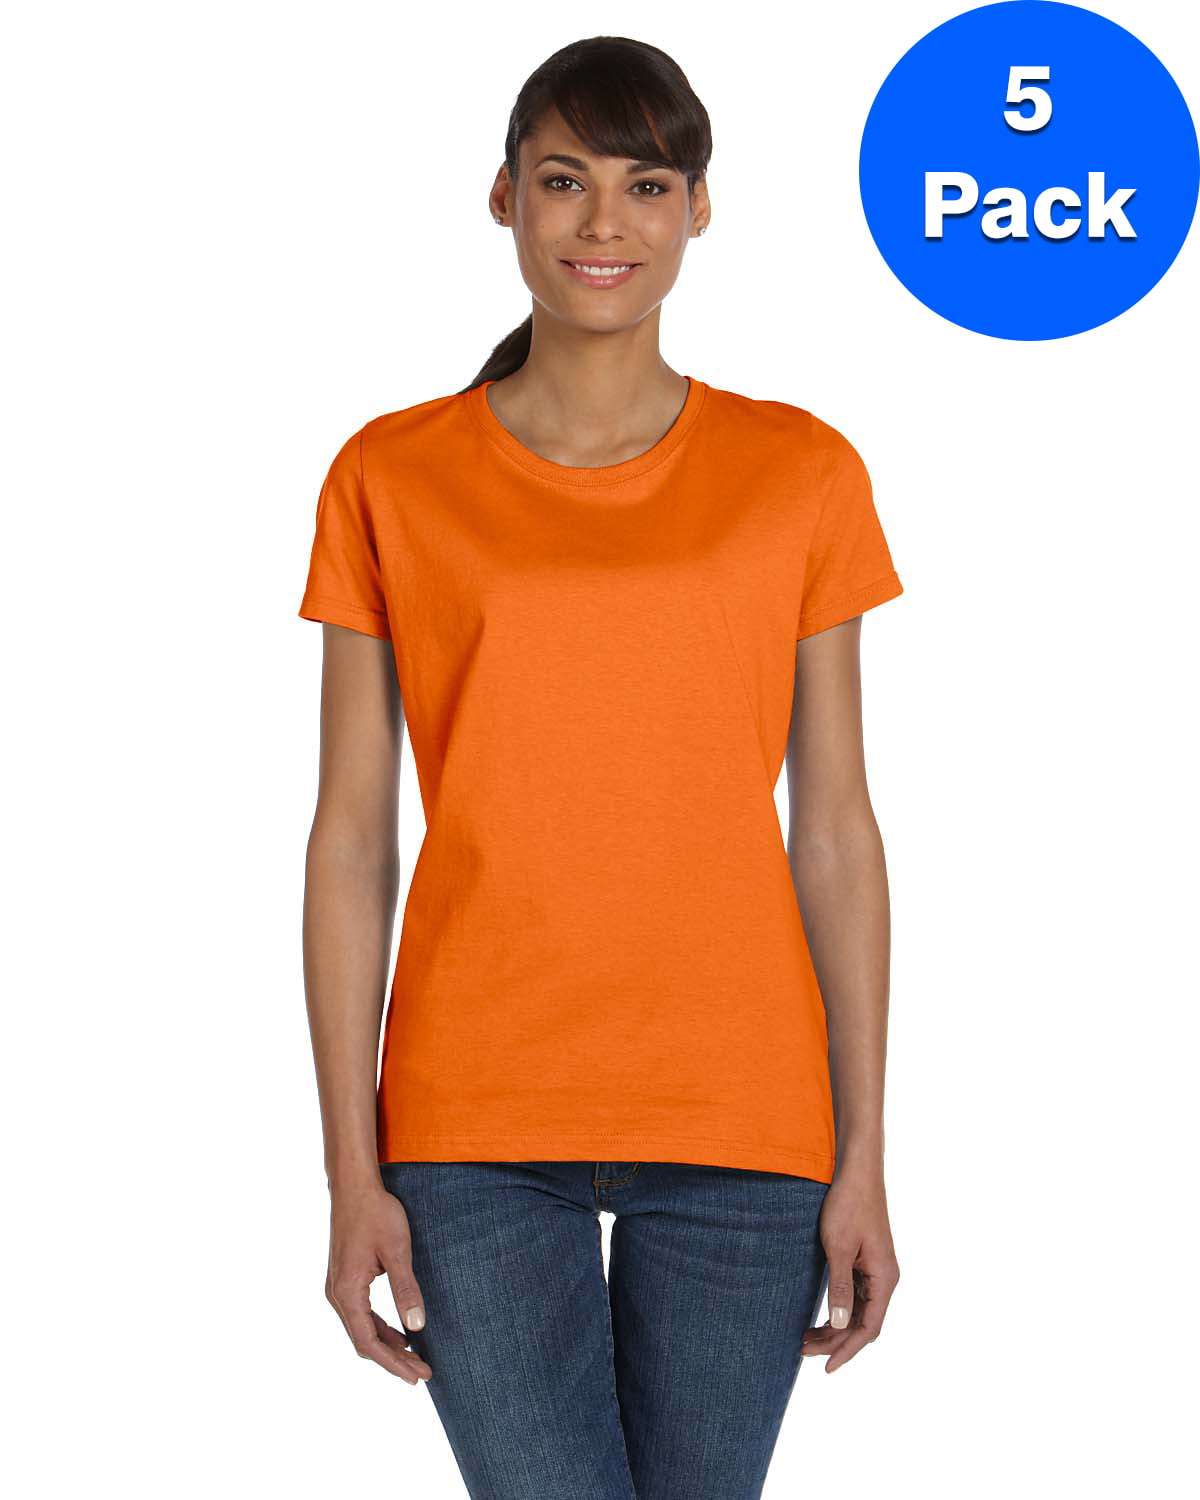 Fruit of the Loom Womens T-Shirt Pack of 5